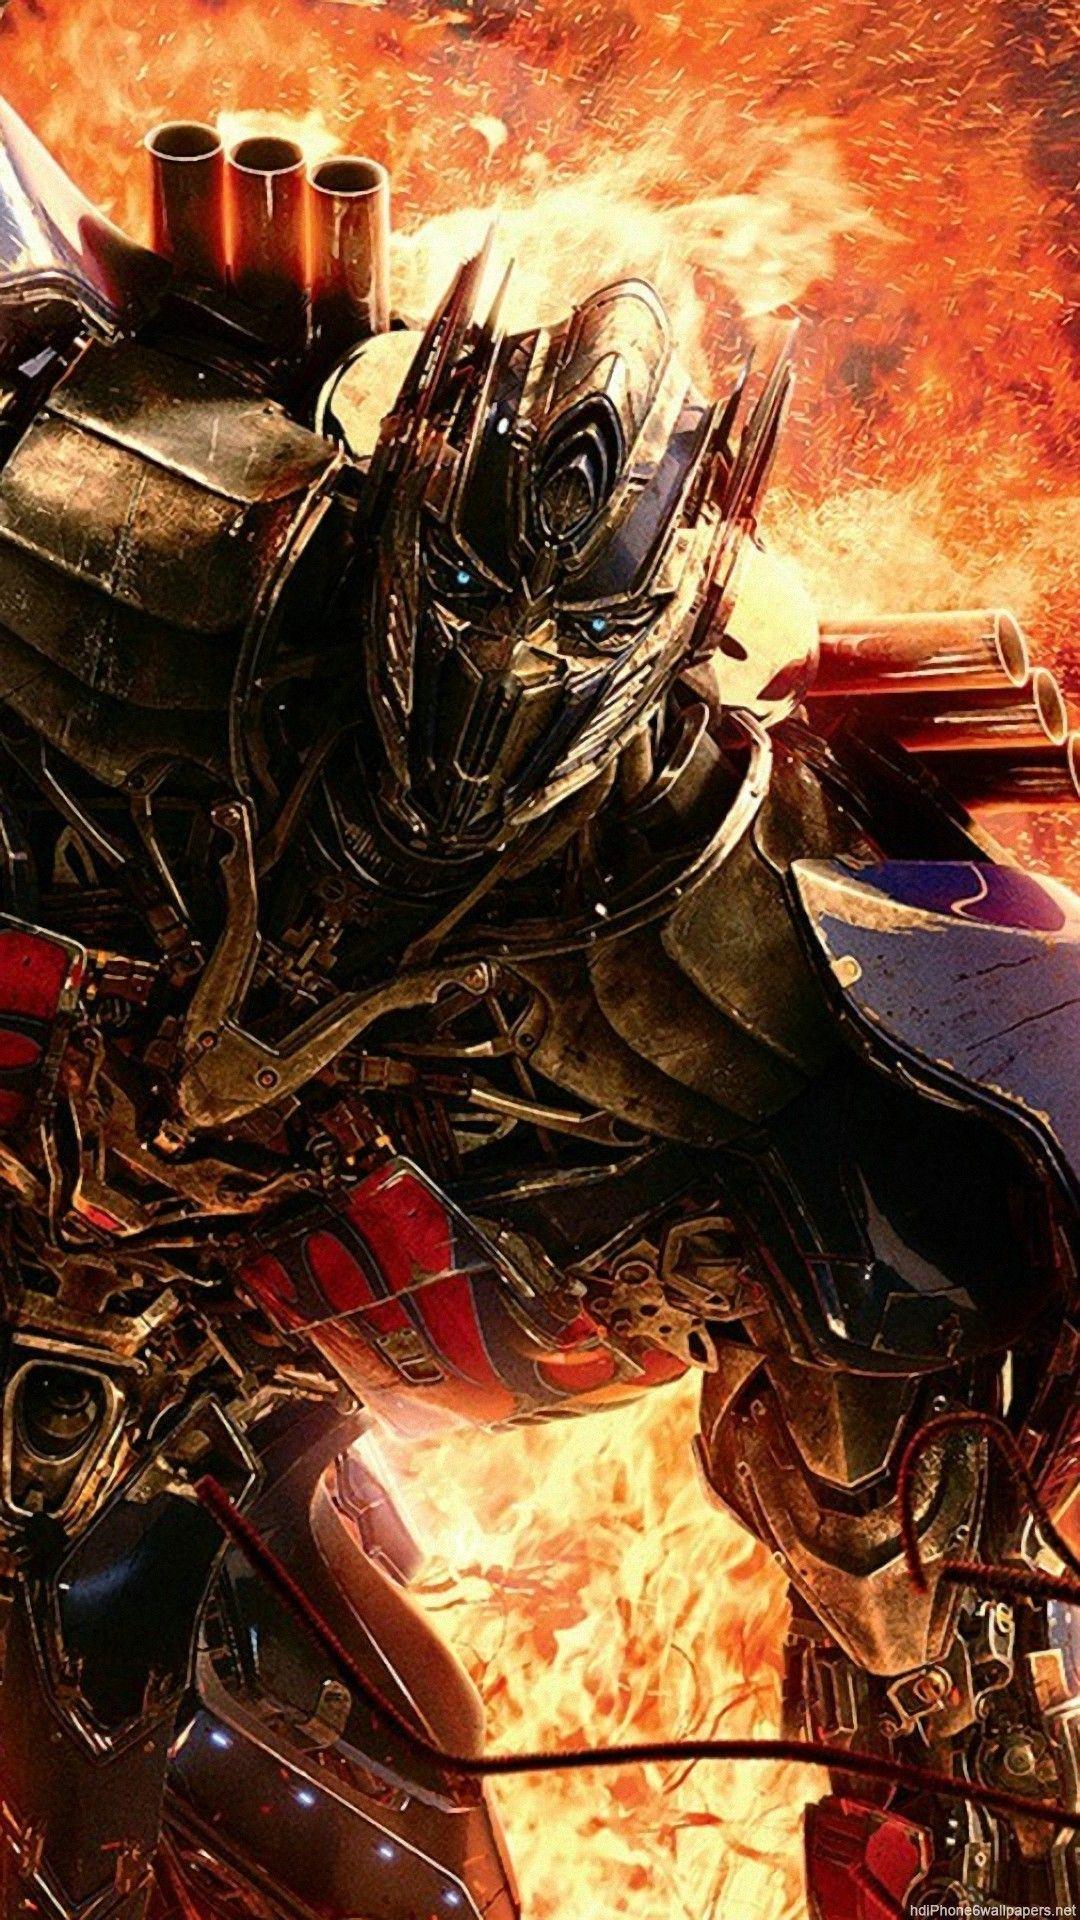 HD transformers age of extinction iphone 6 wallpaper. Optimus prime wallpaper transformers, Optimus prime wallpaper, Optimus prime